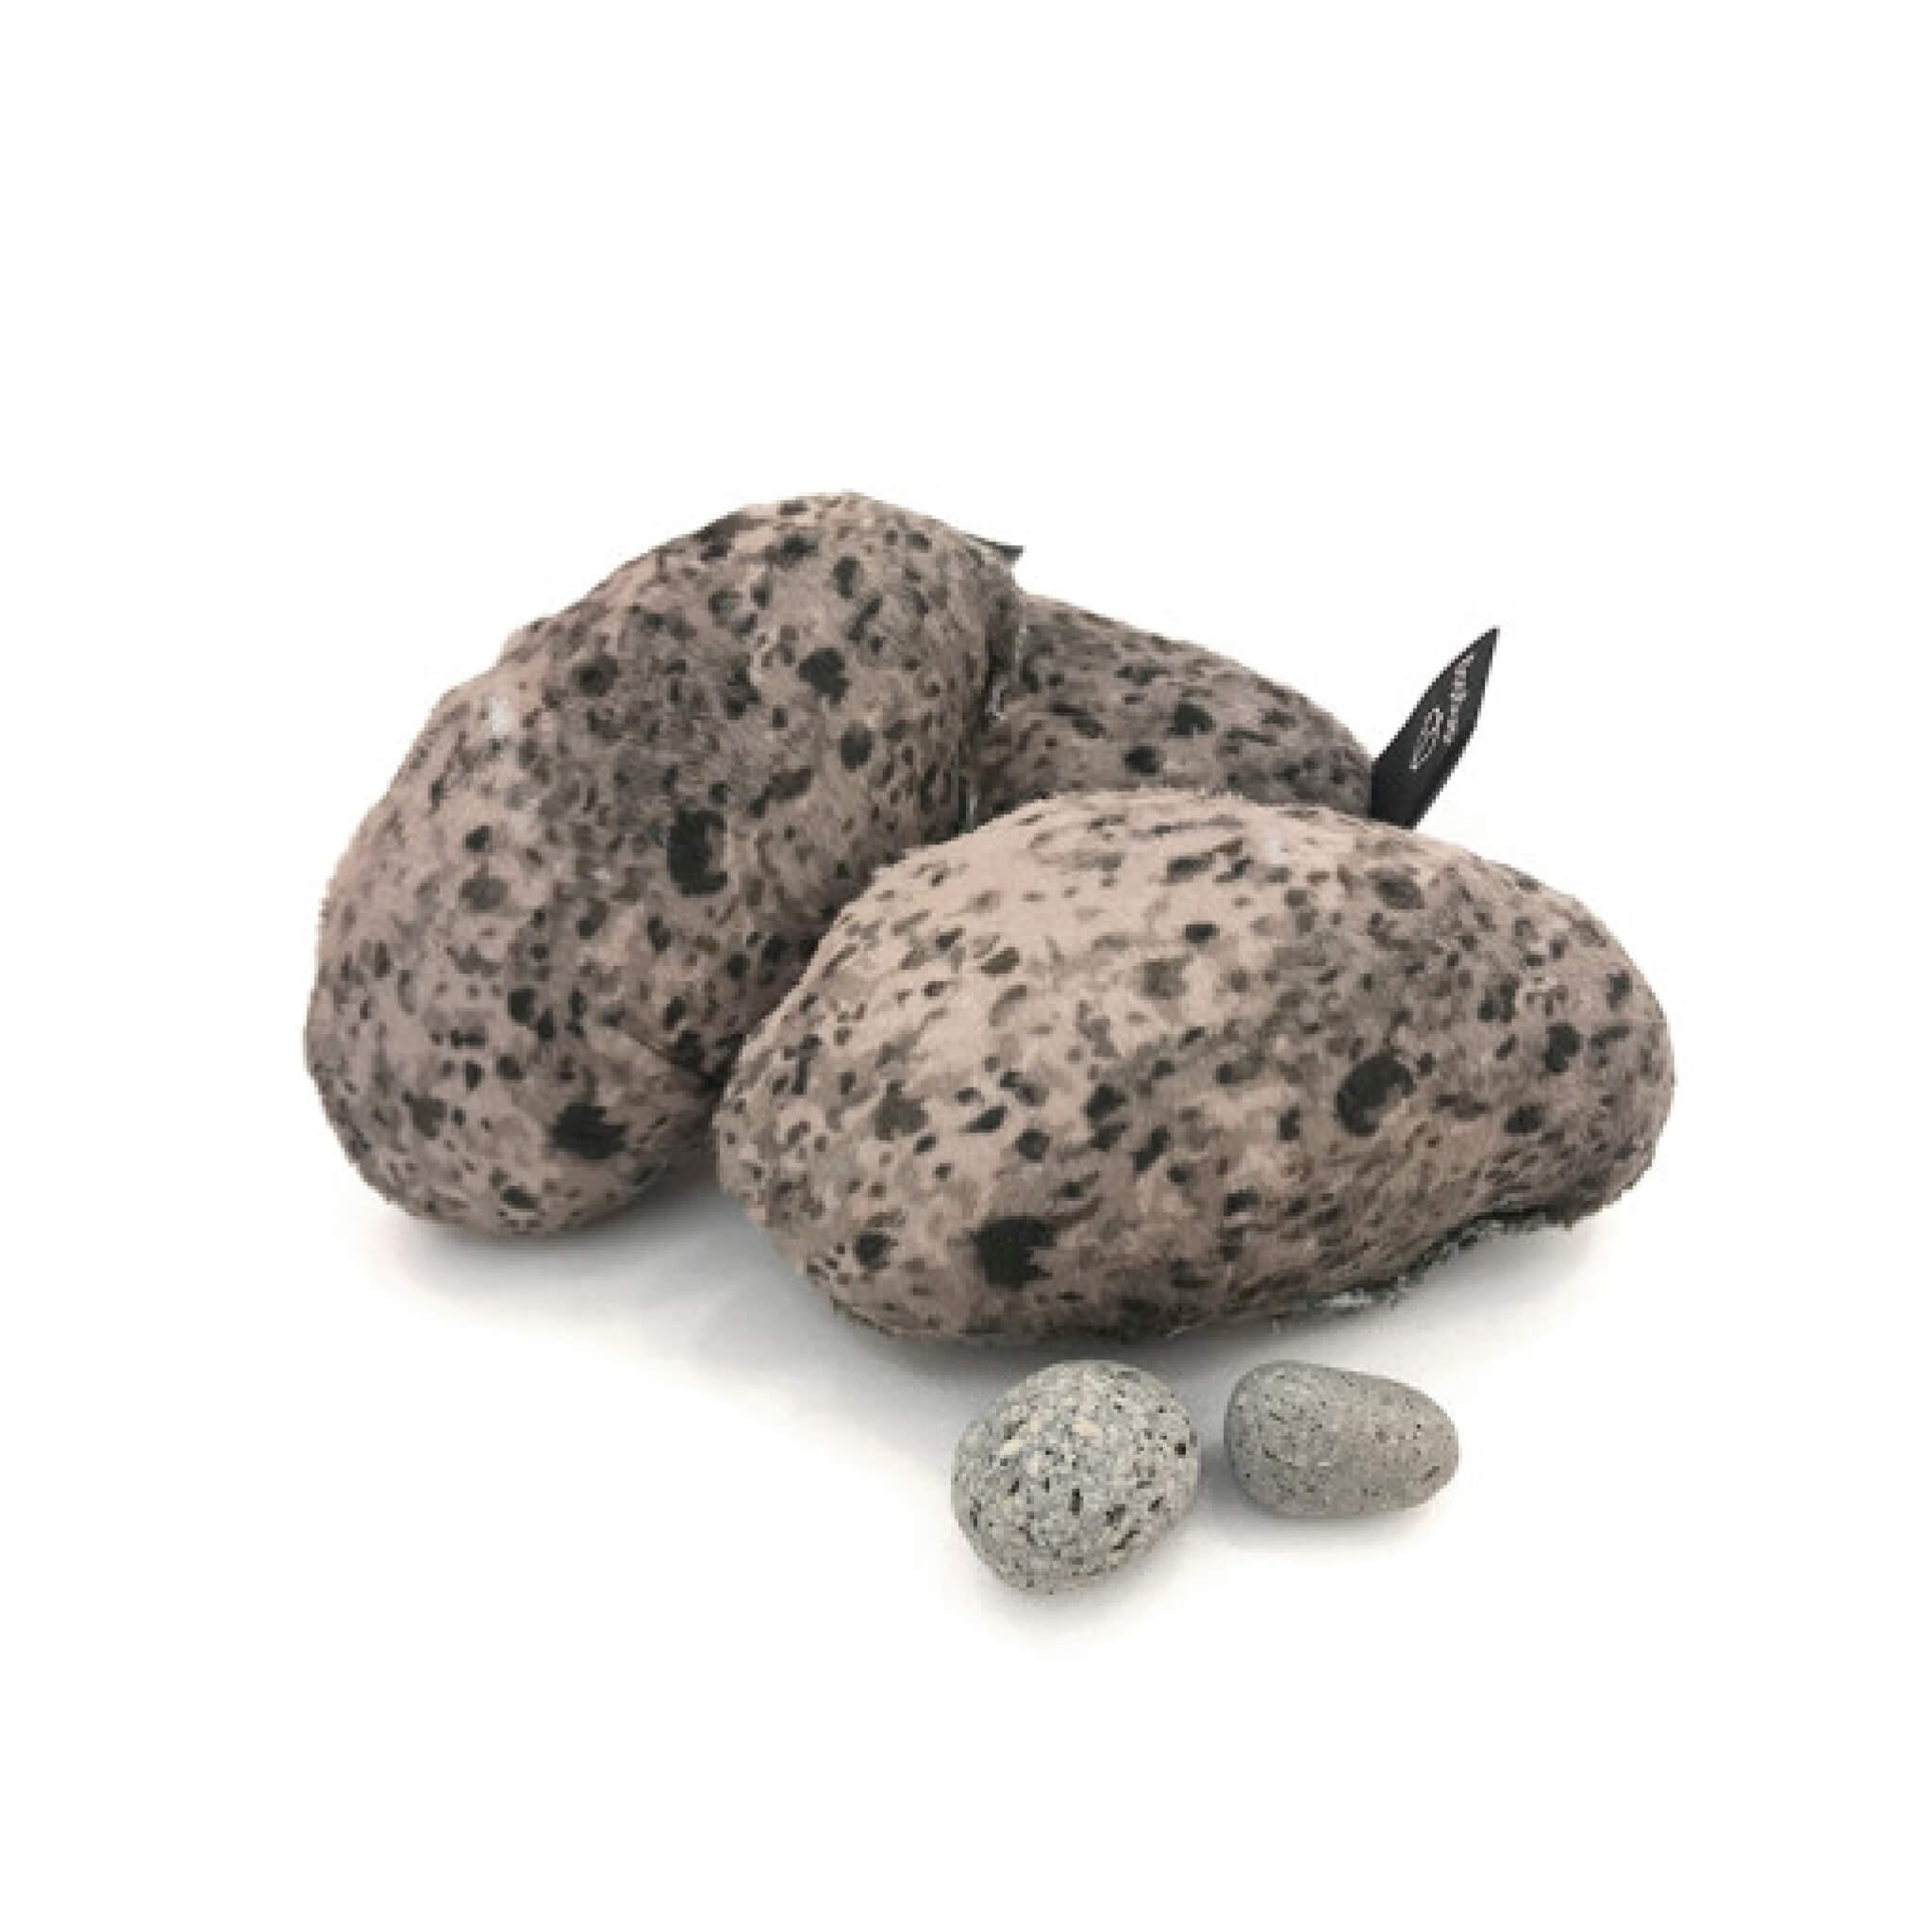 Stone toy with smaller stones.